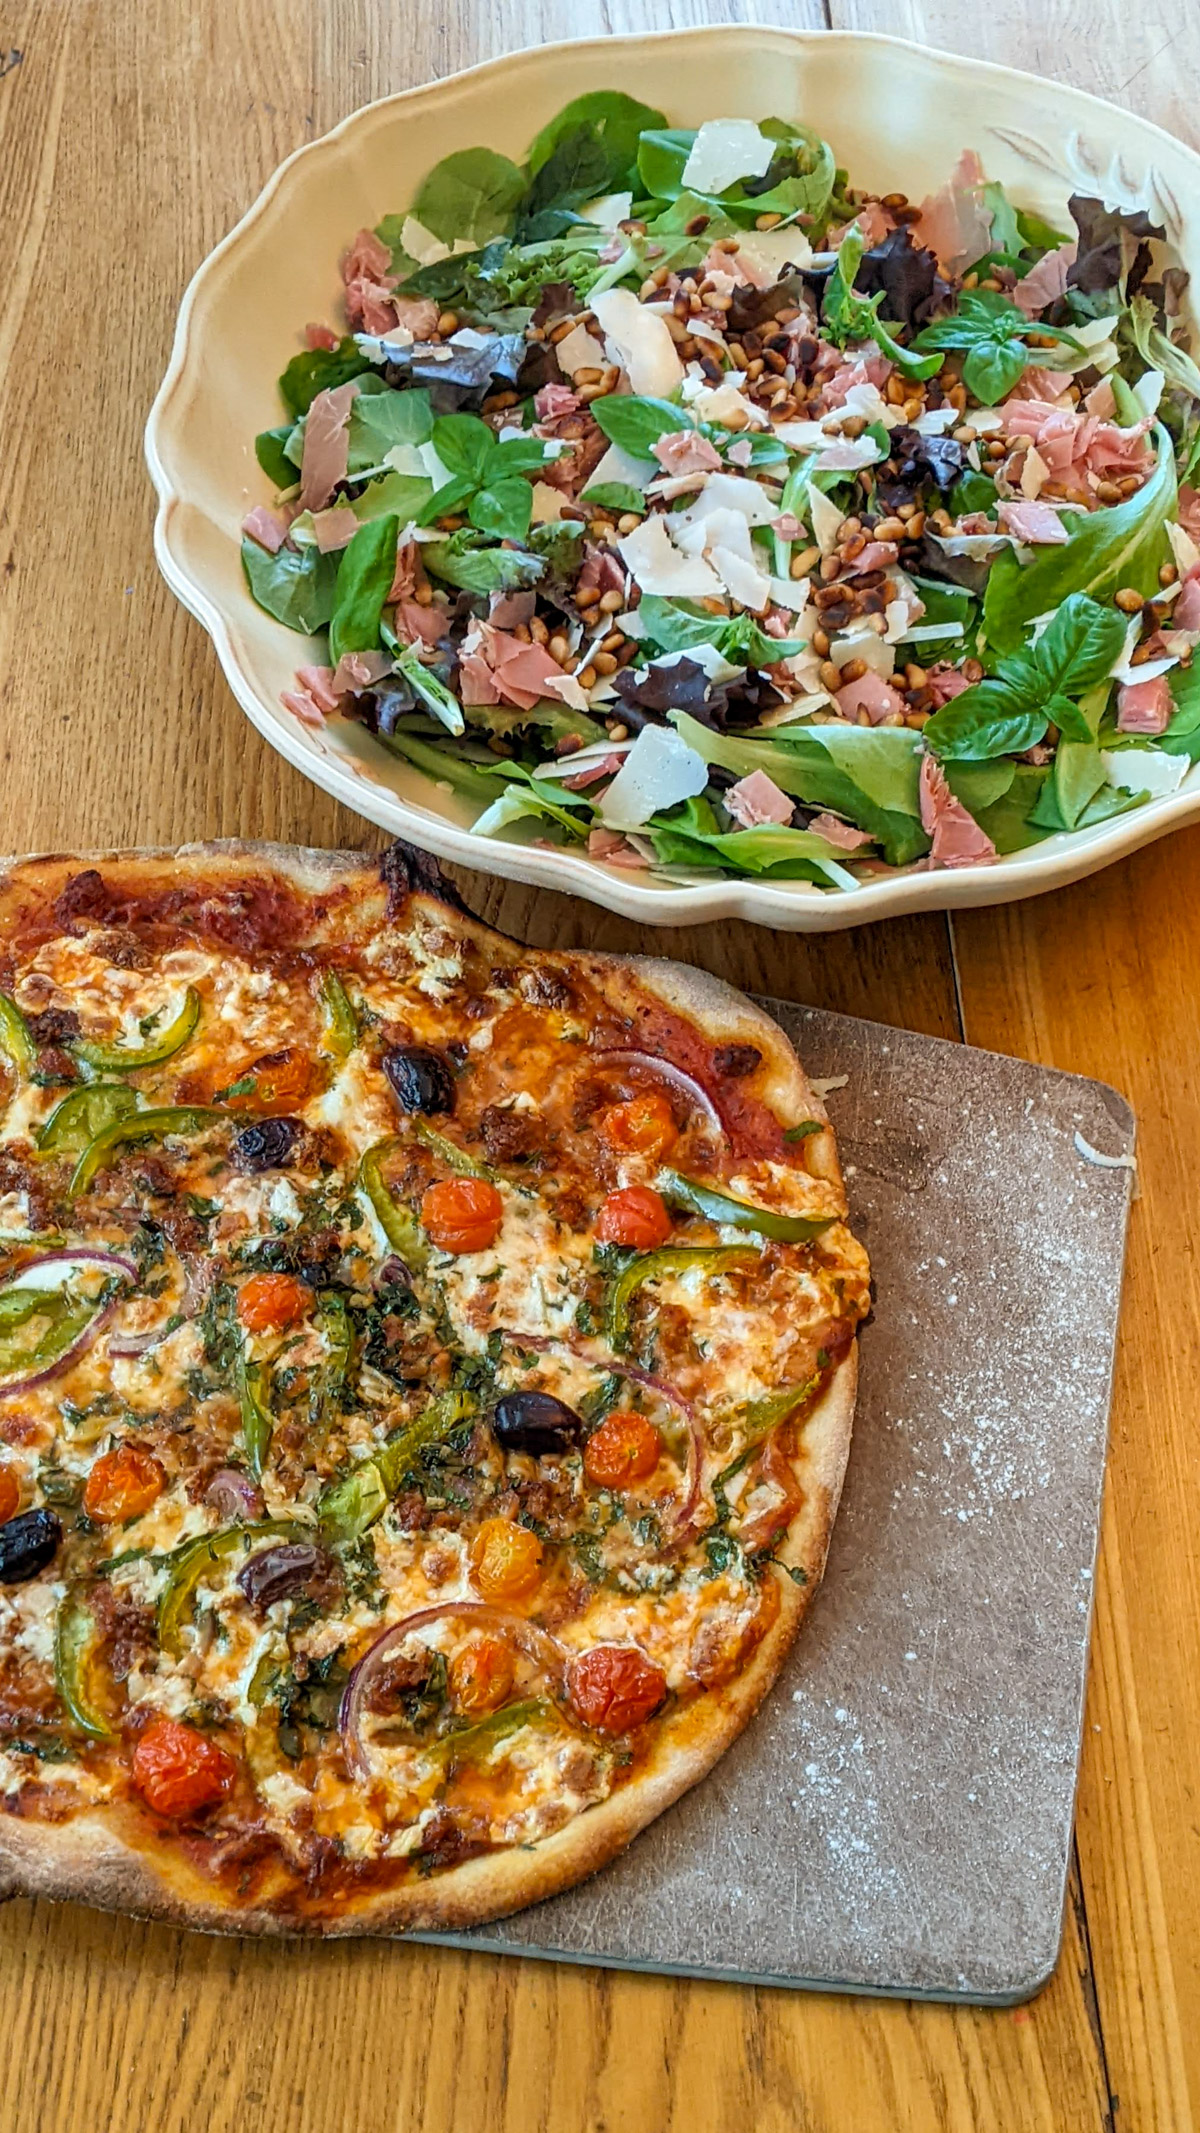 A pizza next to a large salad with Parmesan and prosciutto.